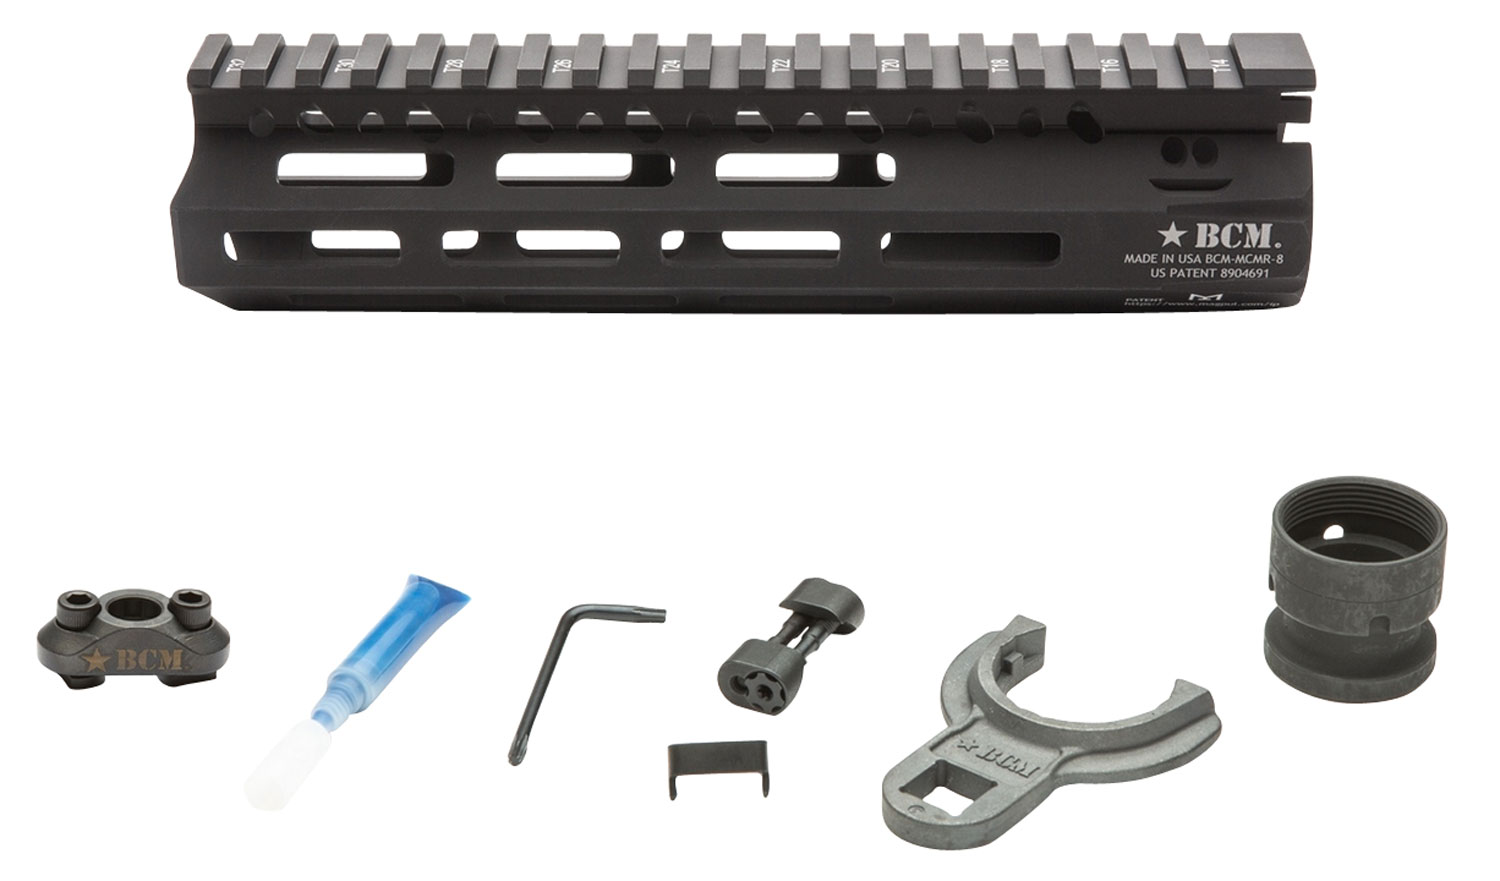 BCM MCMR8556BLK BCMGunfighter MCMR 8